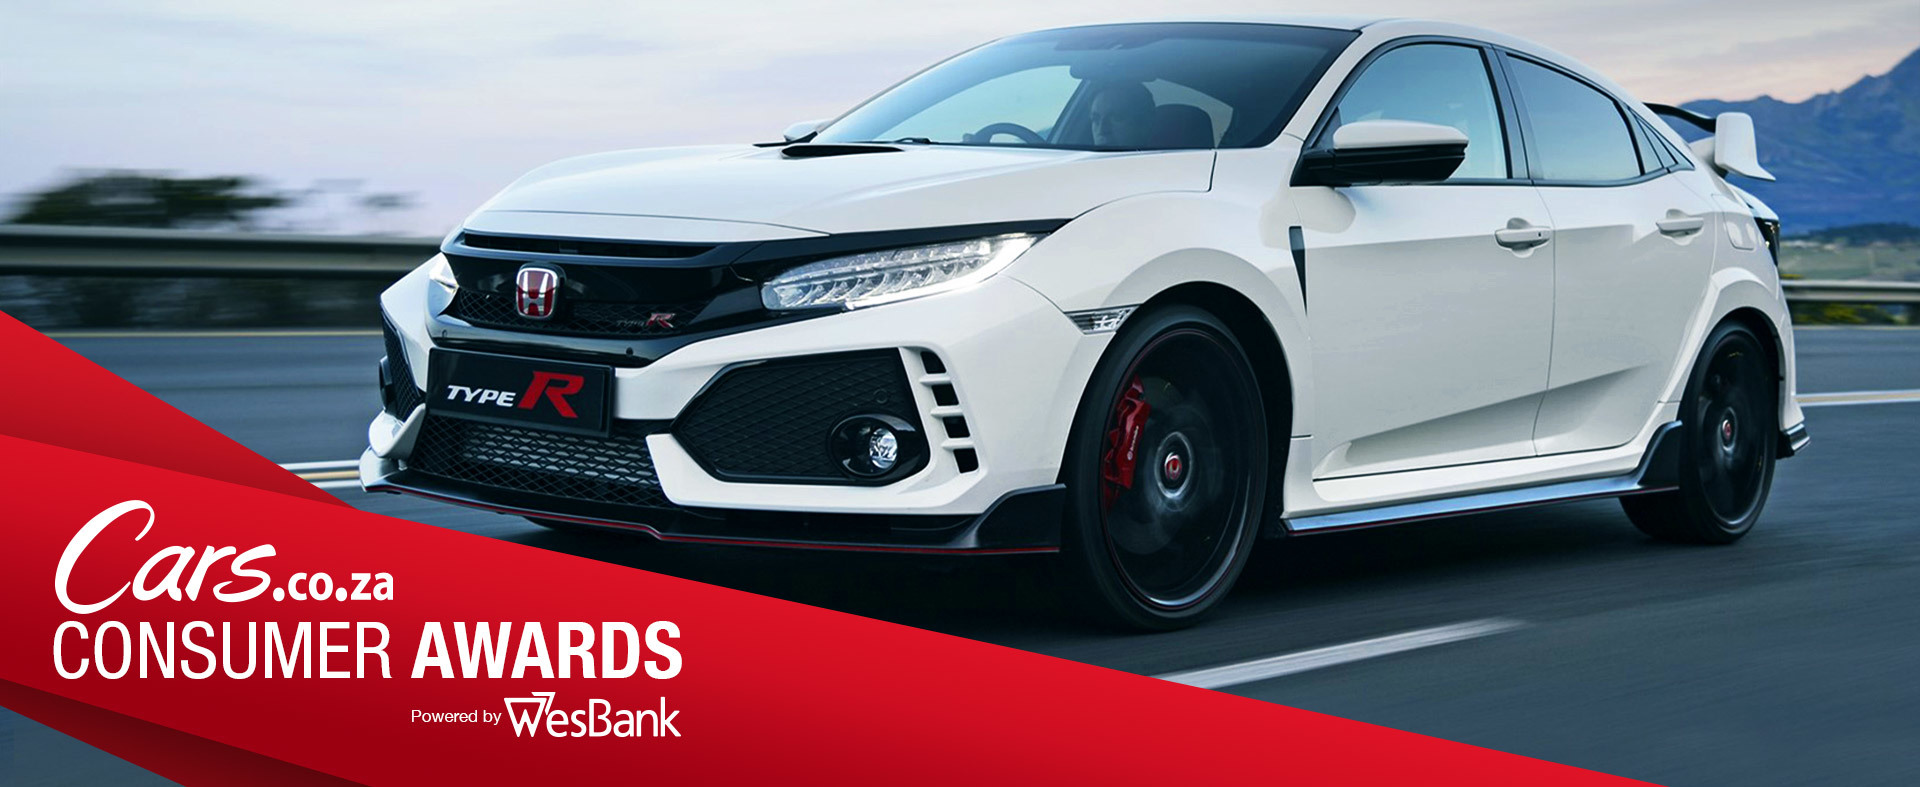 2020/21 Cars.co.za Consumer Awards – powered by WesBank